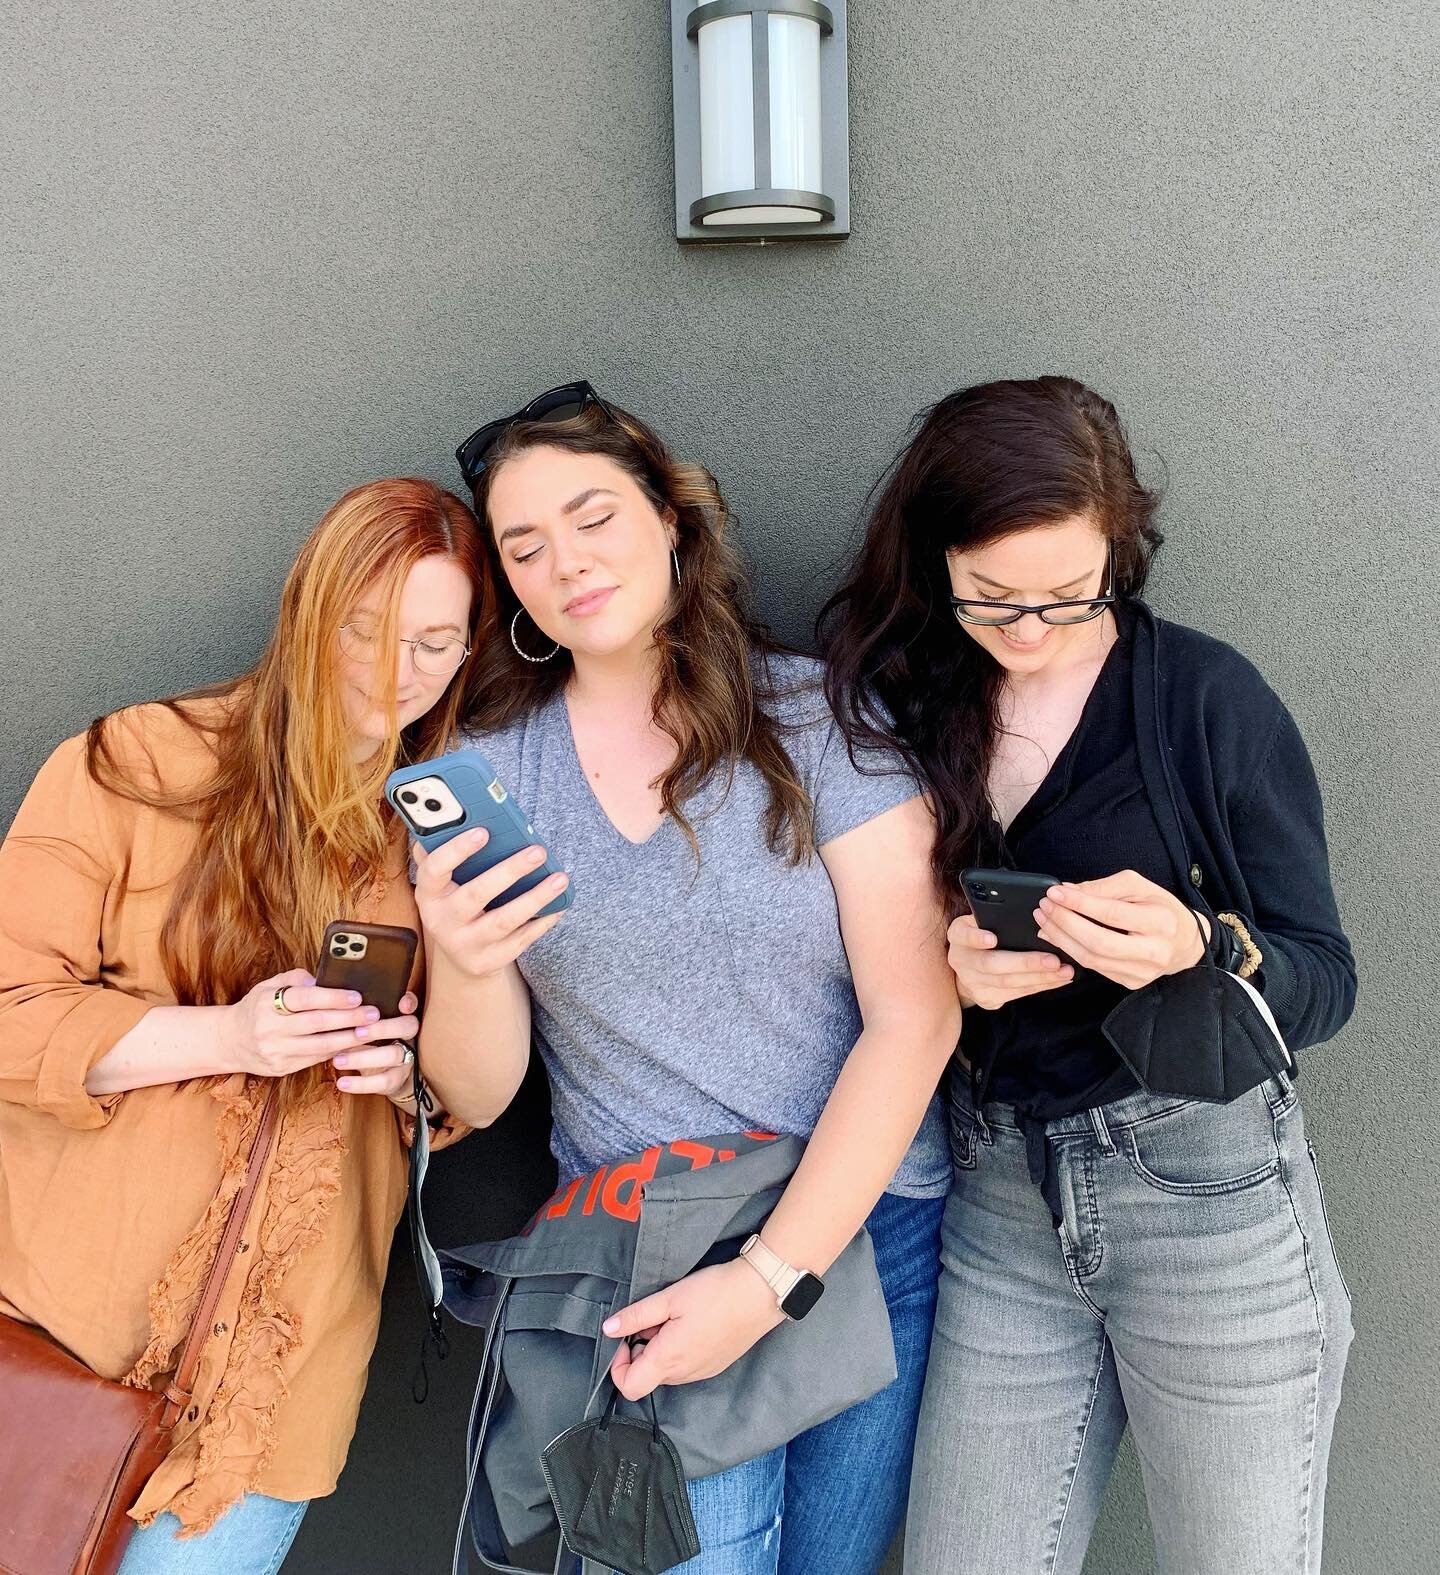 The only photos I have with dear @timesnewrachel from her release day are these gems with @authoradalyngrace outside a Barnes &amp; Noble because @m.santee thought the three of us on our phones looked cute and forced us into recreating the moment. I 